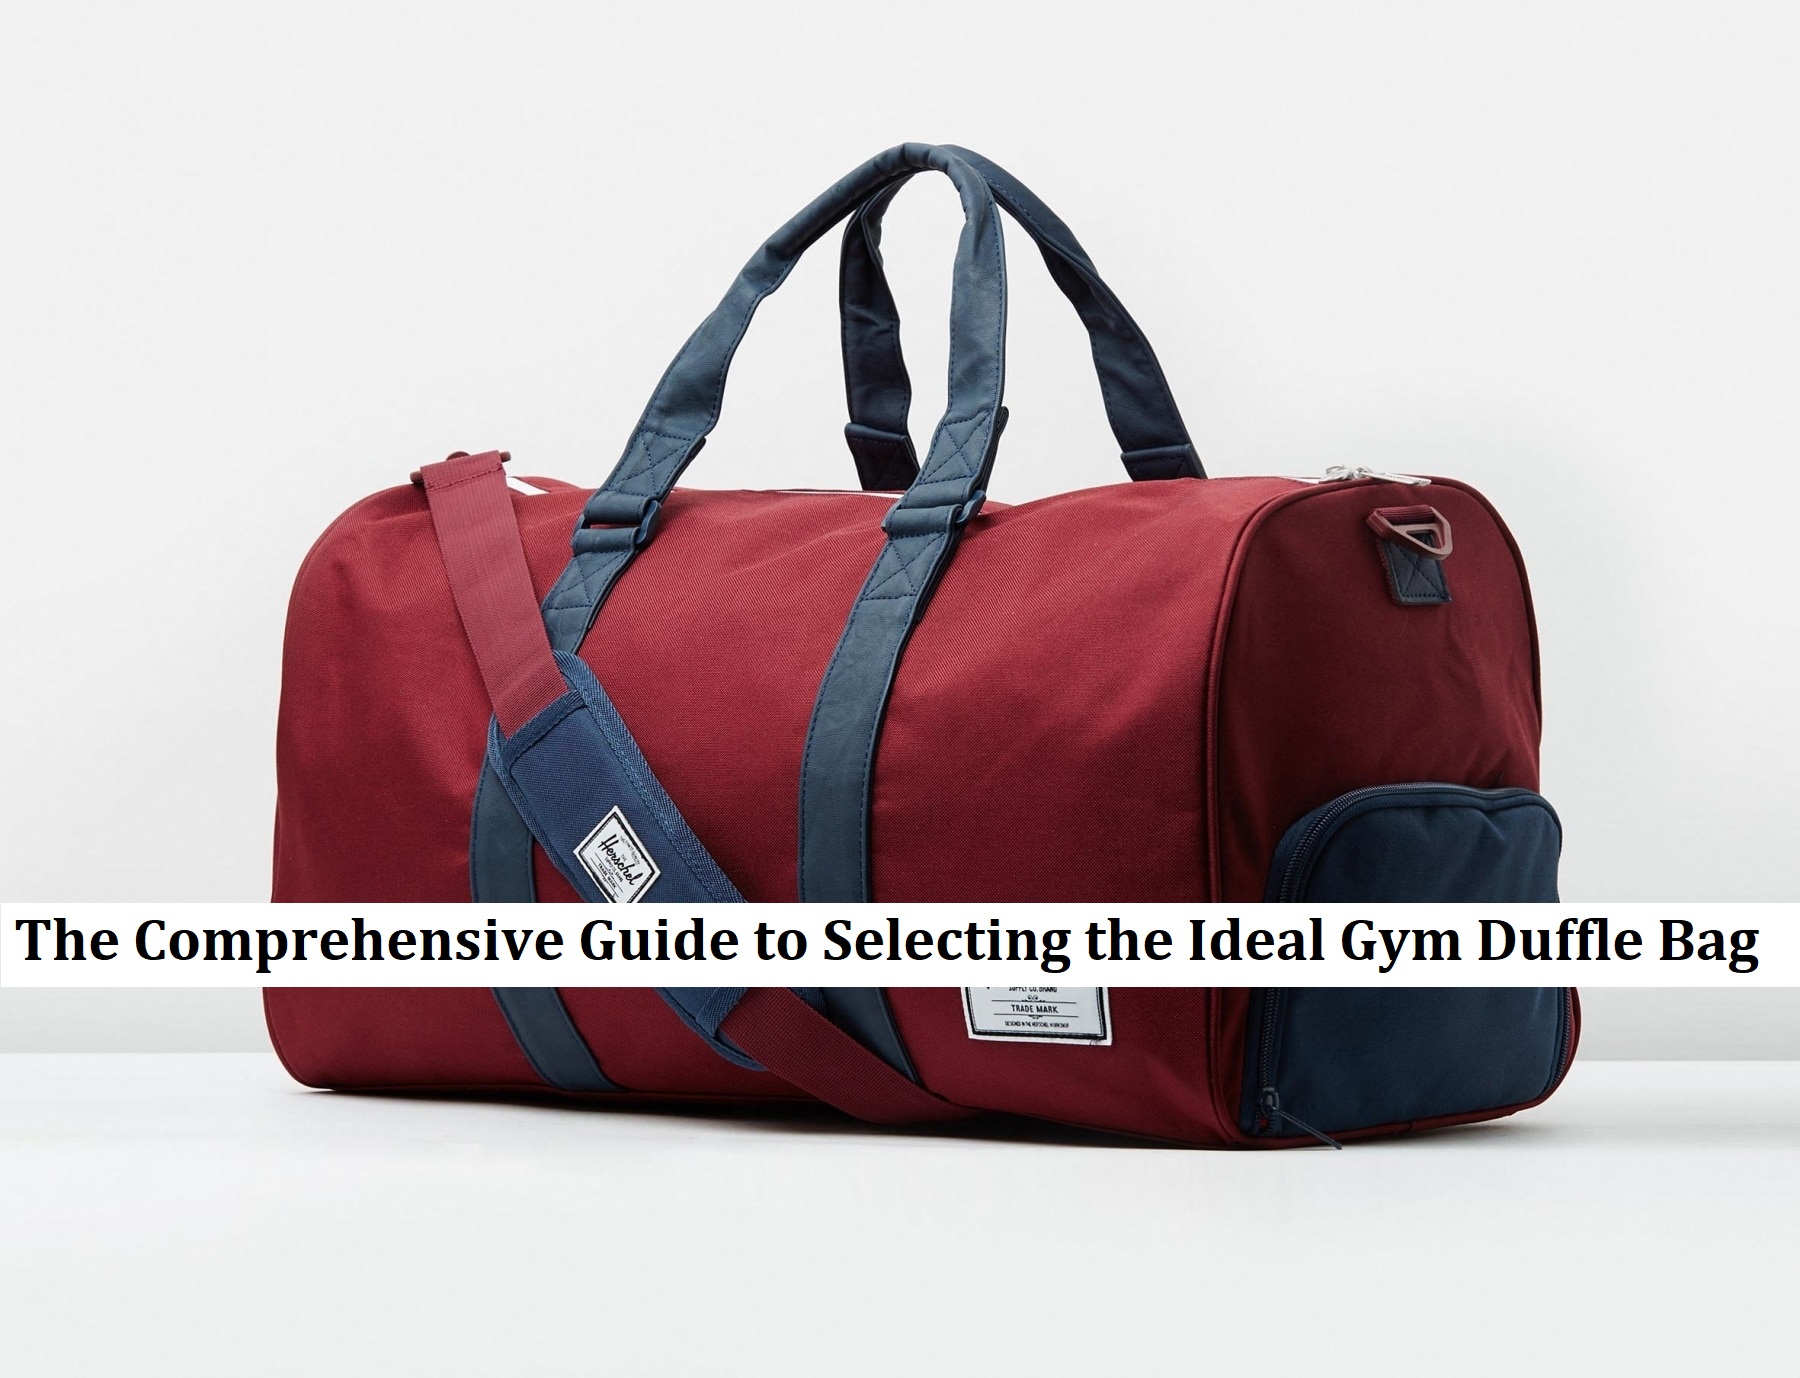 The Comprehensive Guide to Selecting the Ideal Gym Duffle Bag